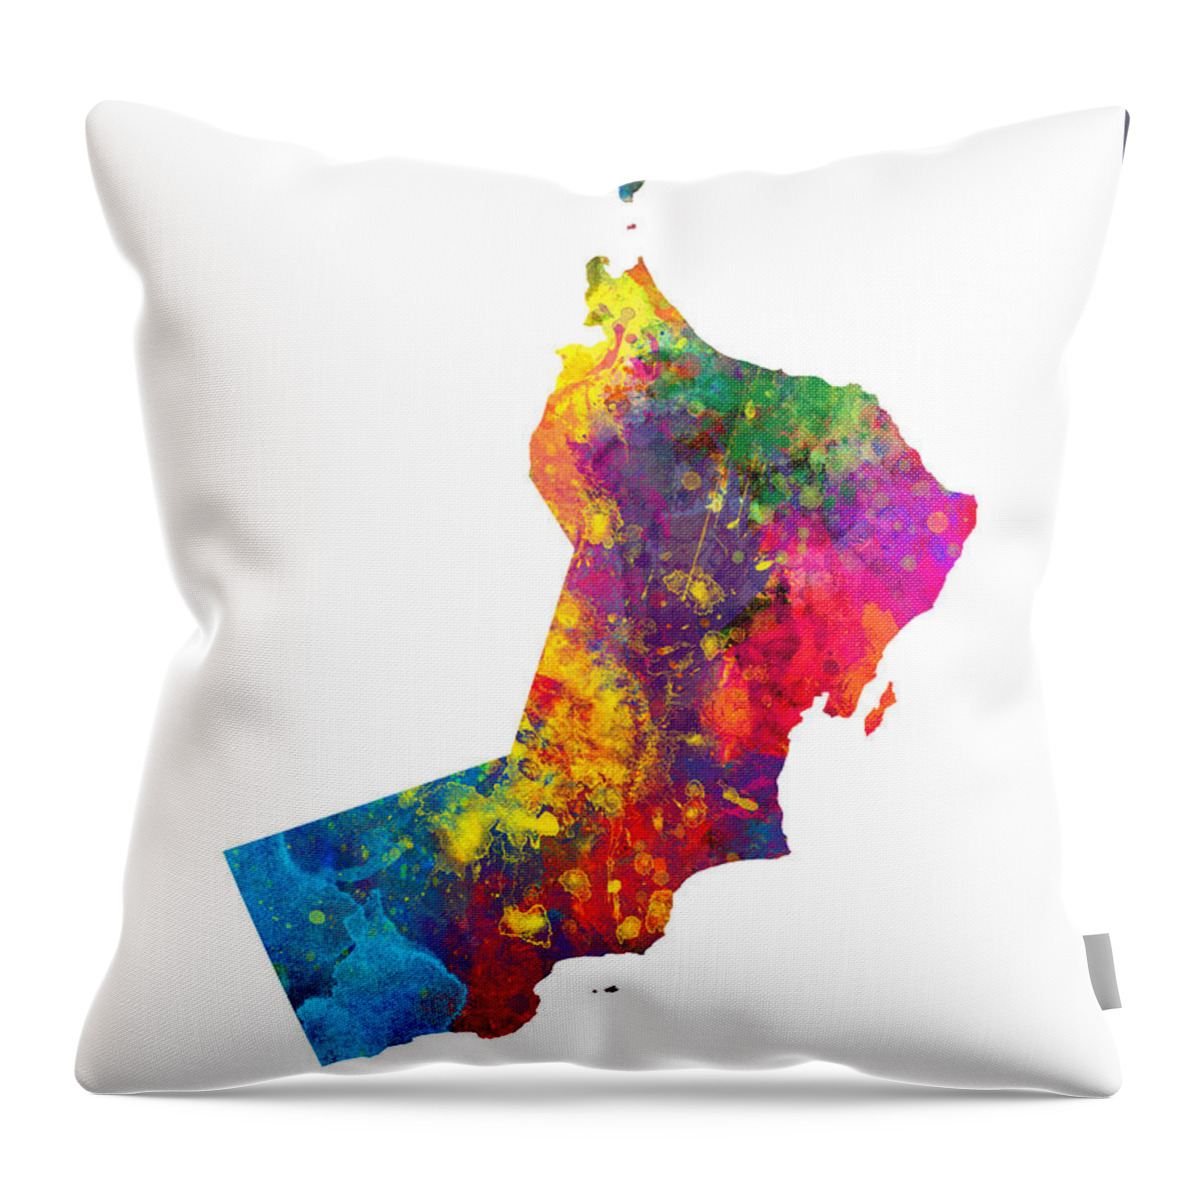 Oman Throw Pillow featuring the digital art Oman Watercolor Map by Michael Tompsett